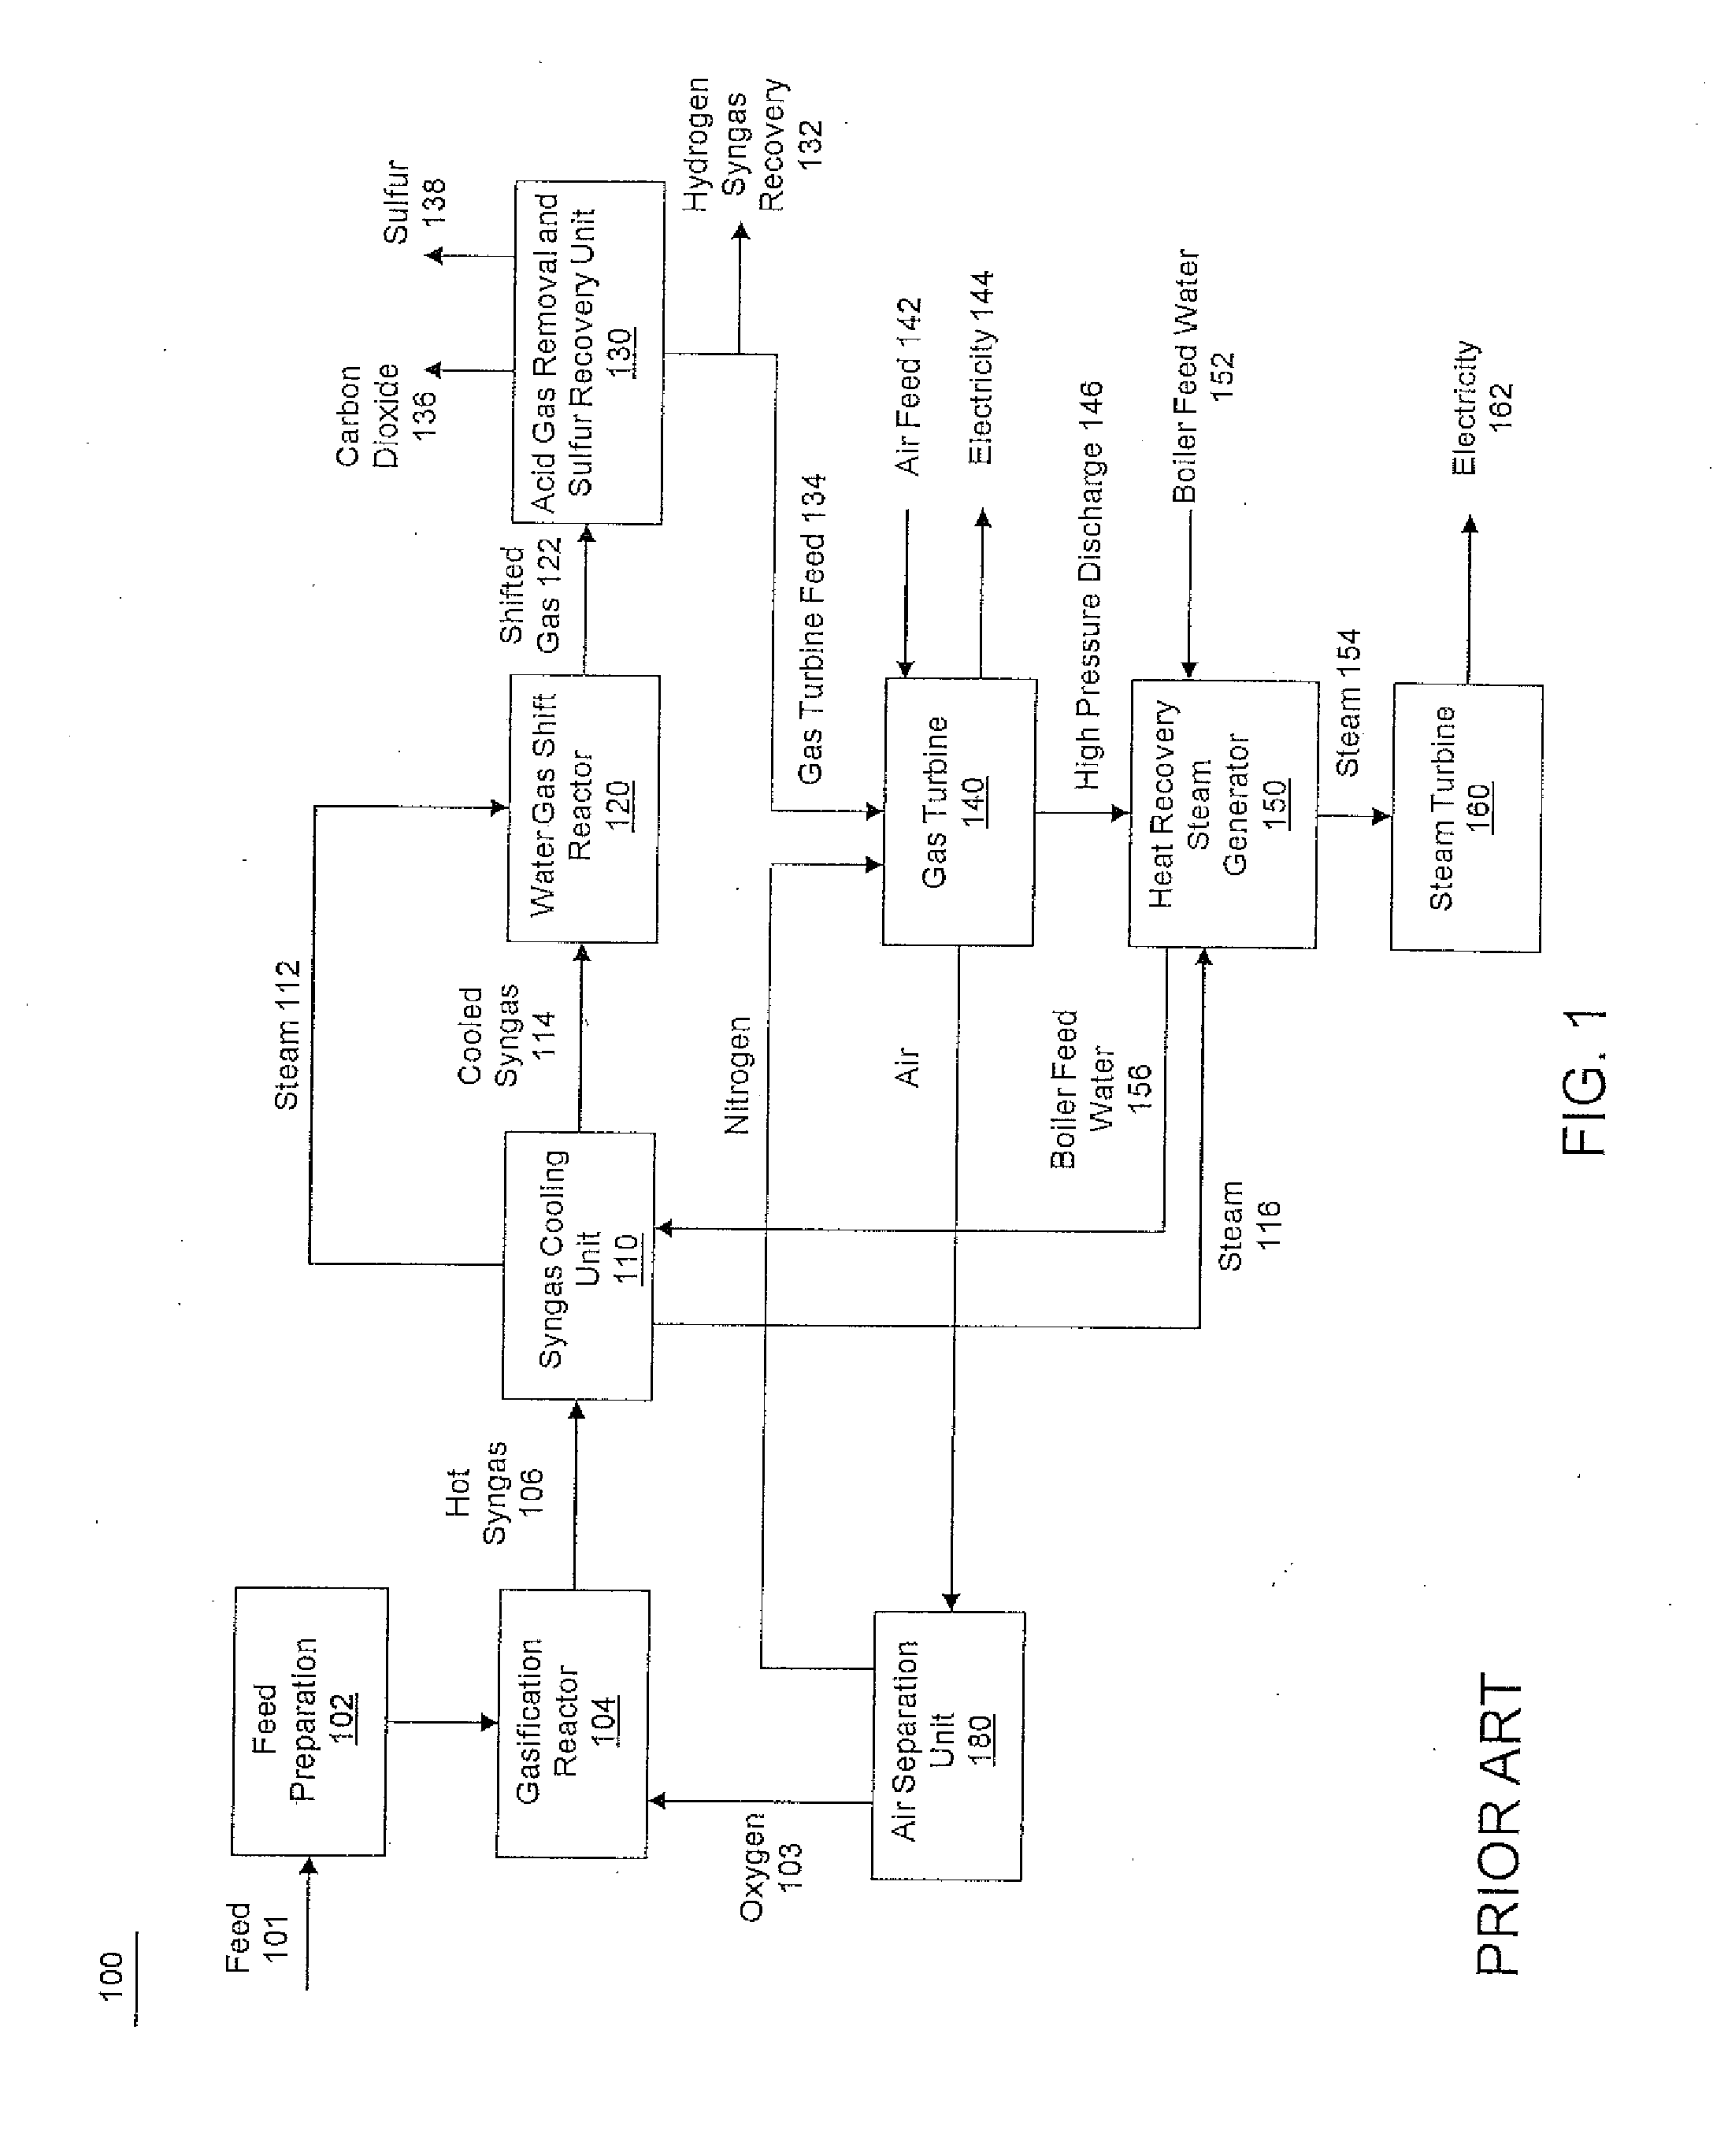 Hydrogen production from an integrated electrolysis cell and hydrocarbon gasification reactor